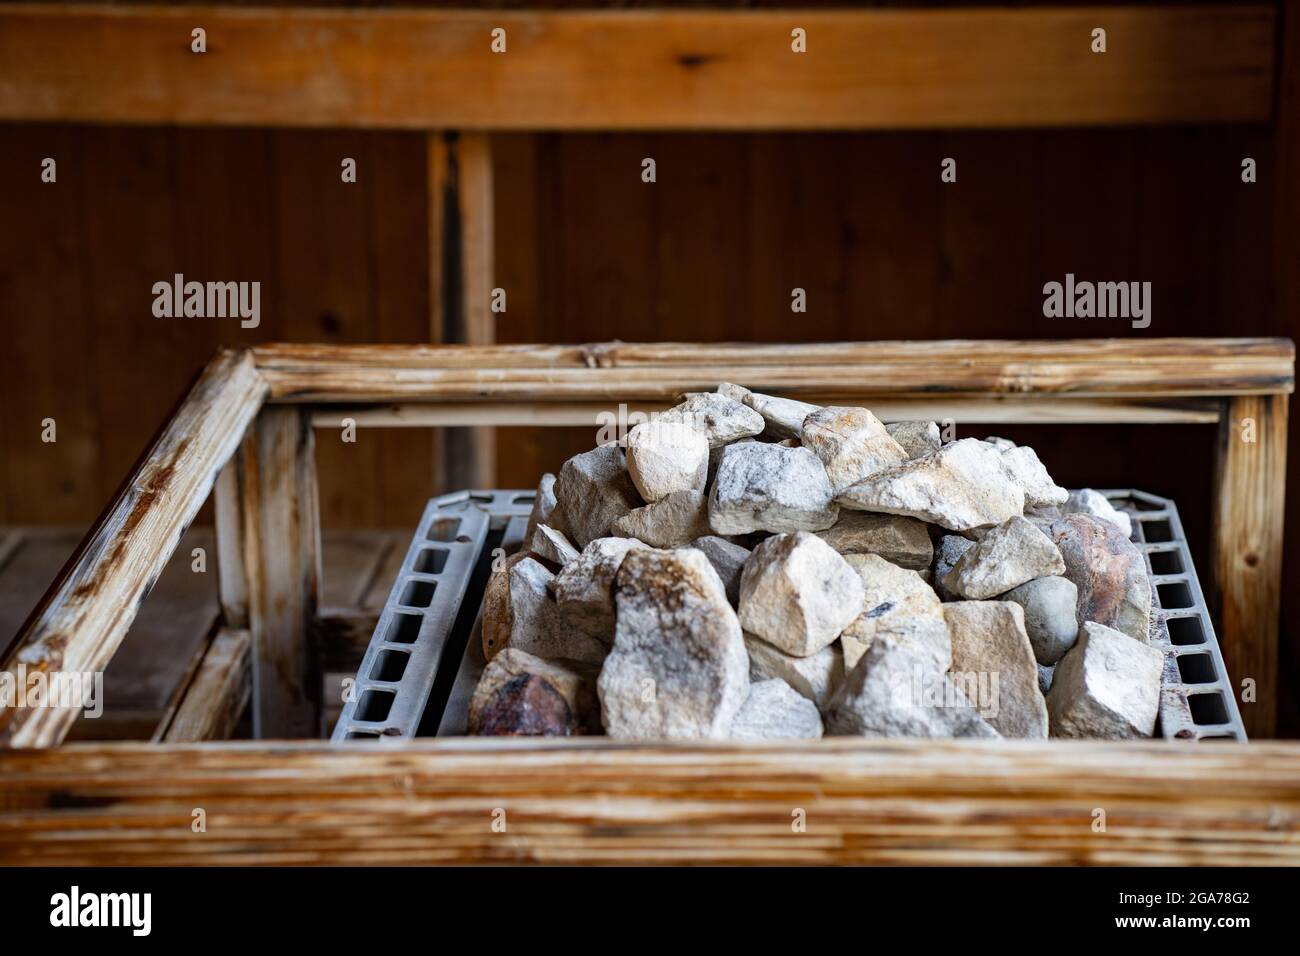 Heap of stones on a metal shelf in a wooden container Stock Photo